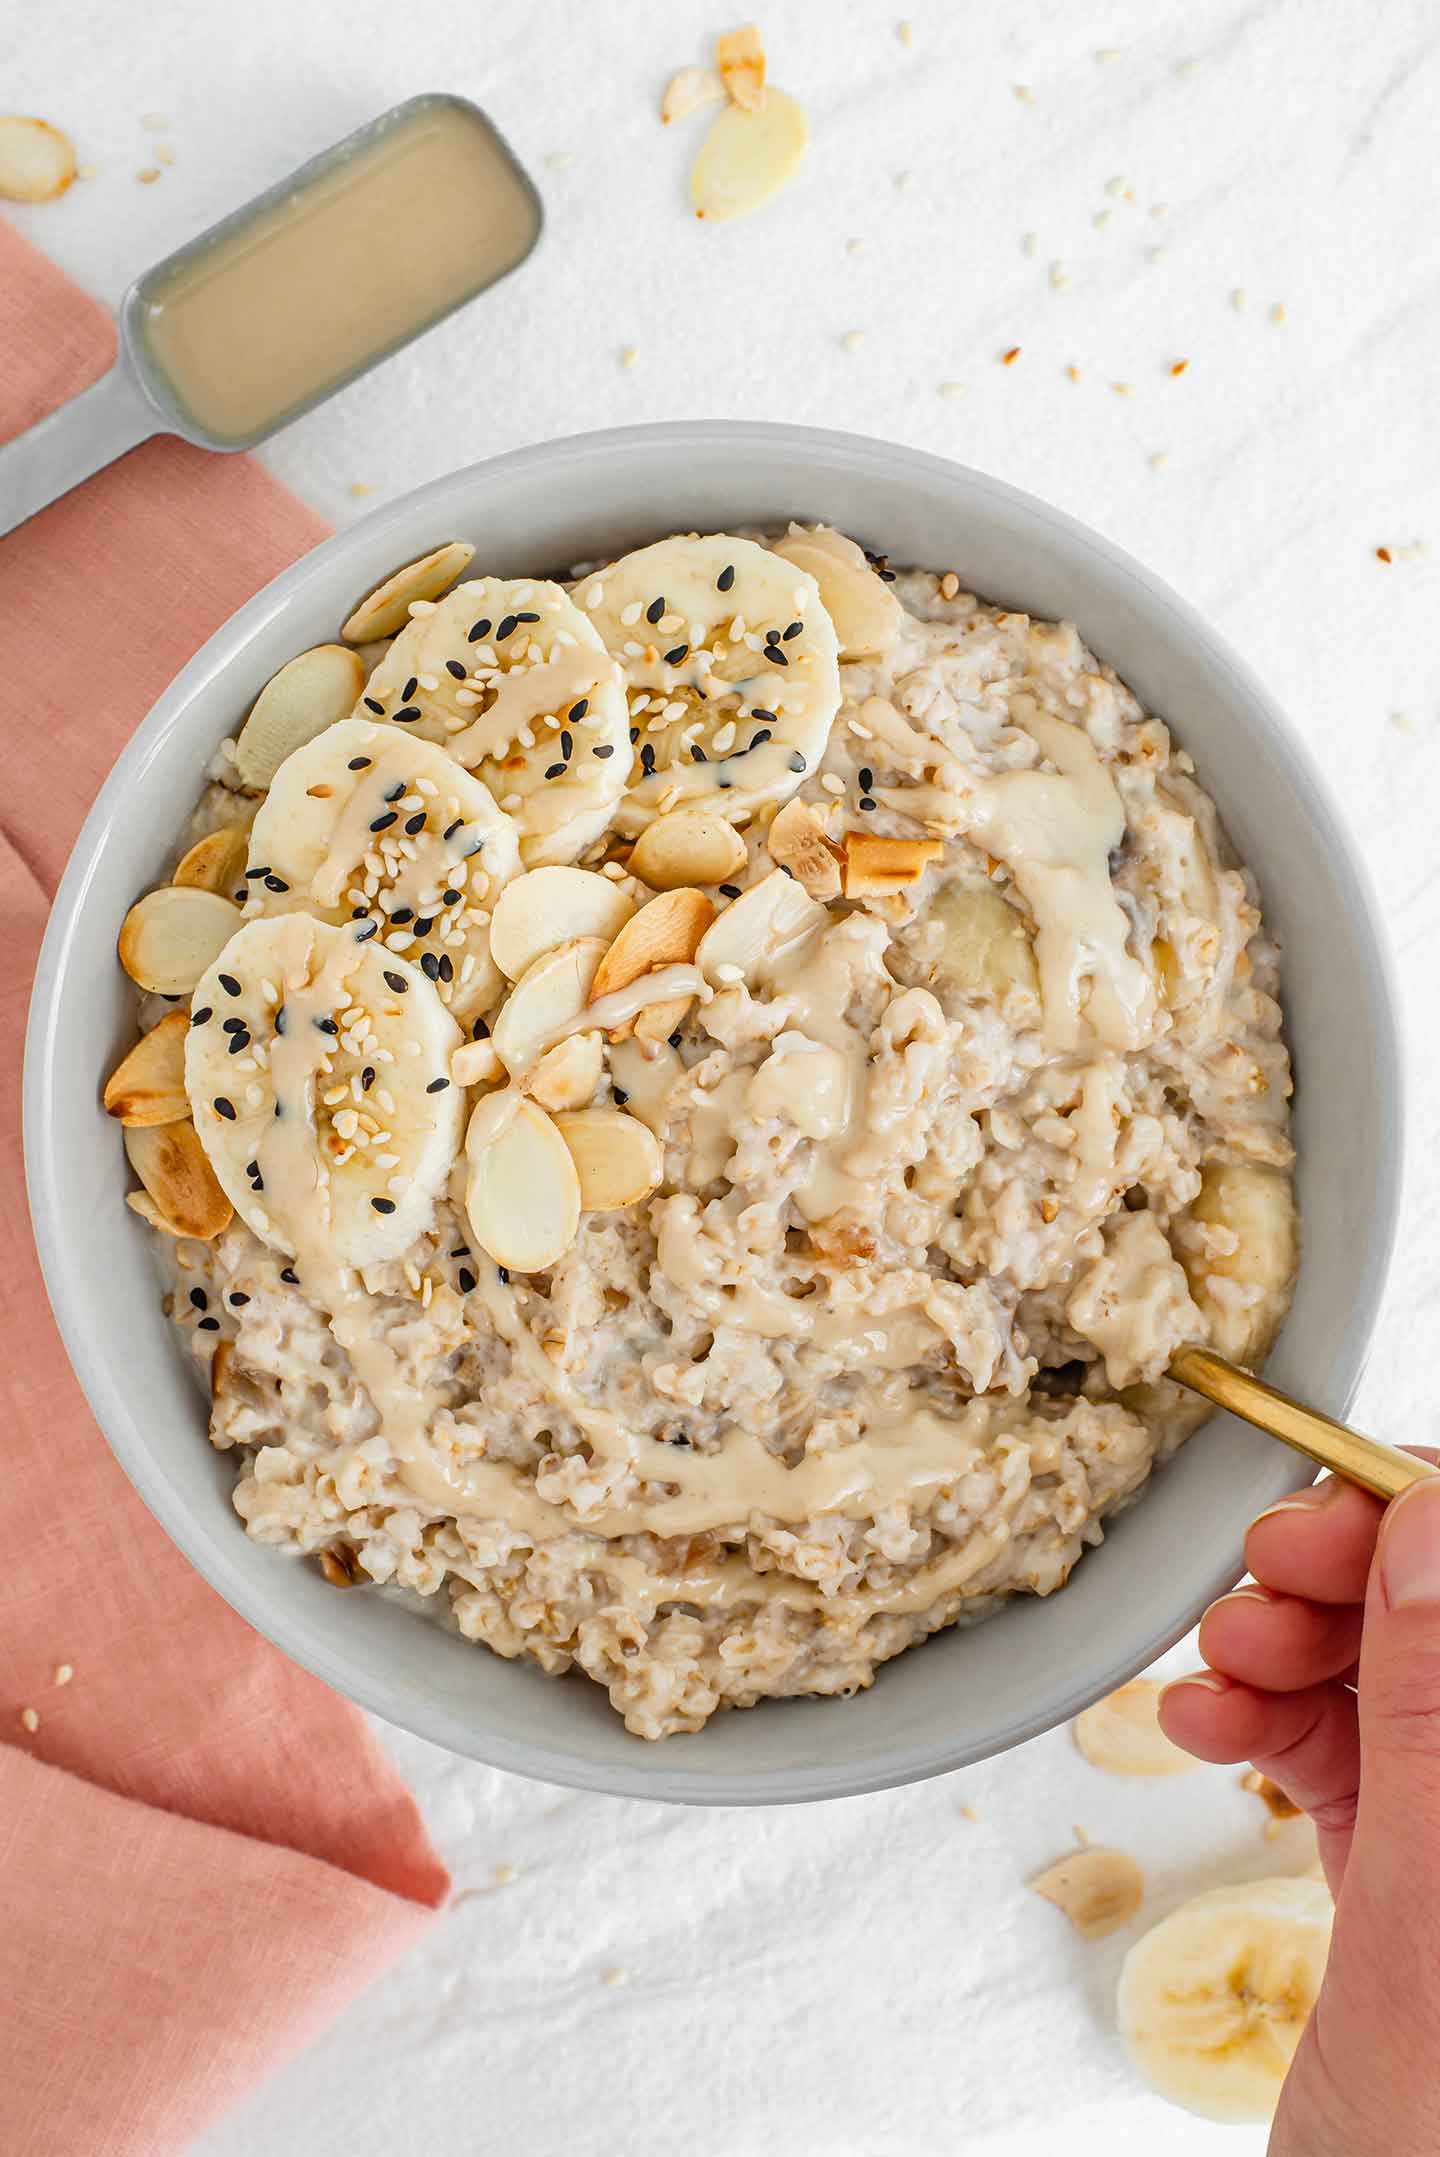 Top down view of a hand dipping a spoon into a bowl of maple tahini oatmeal topped with sliced banana, toasted almonds, toasted sesame seeds and drizzled with extra tahini.